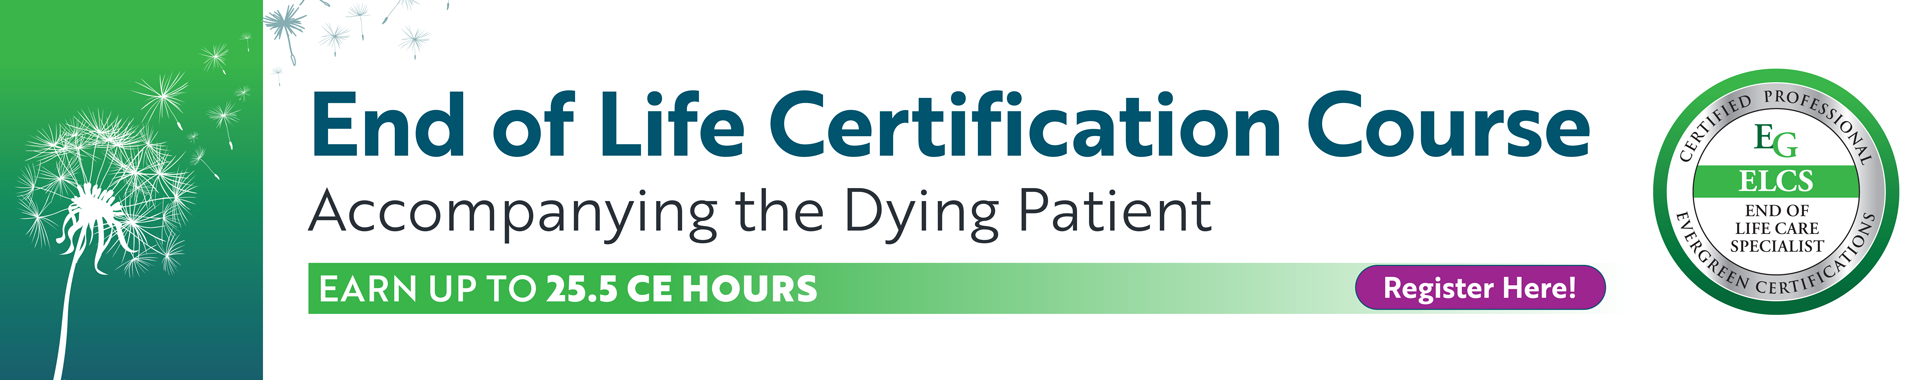 End of Life Certification Course: Accompanying the Dying Patient